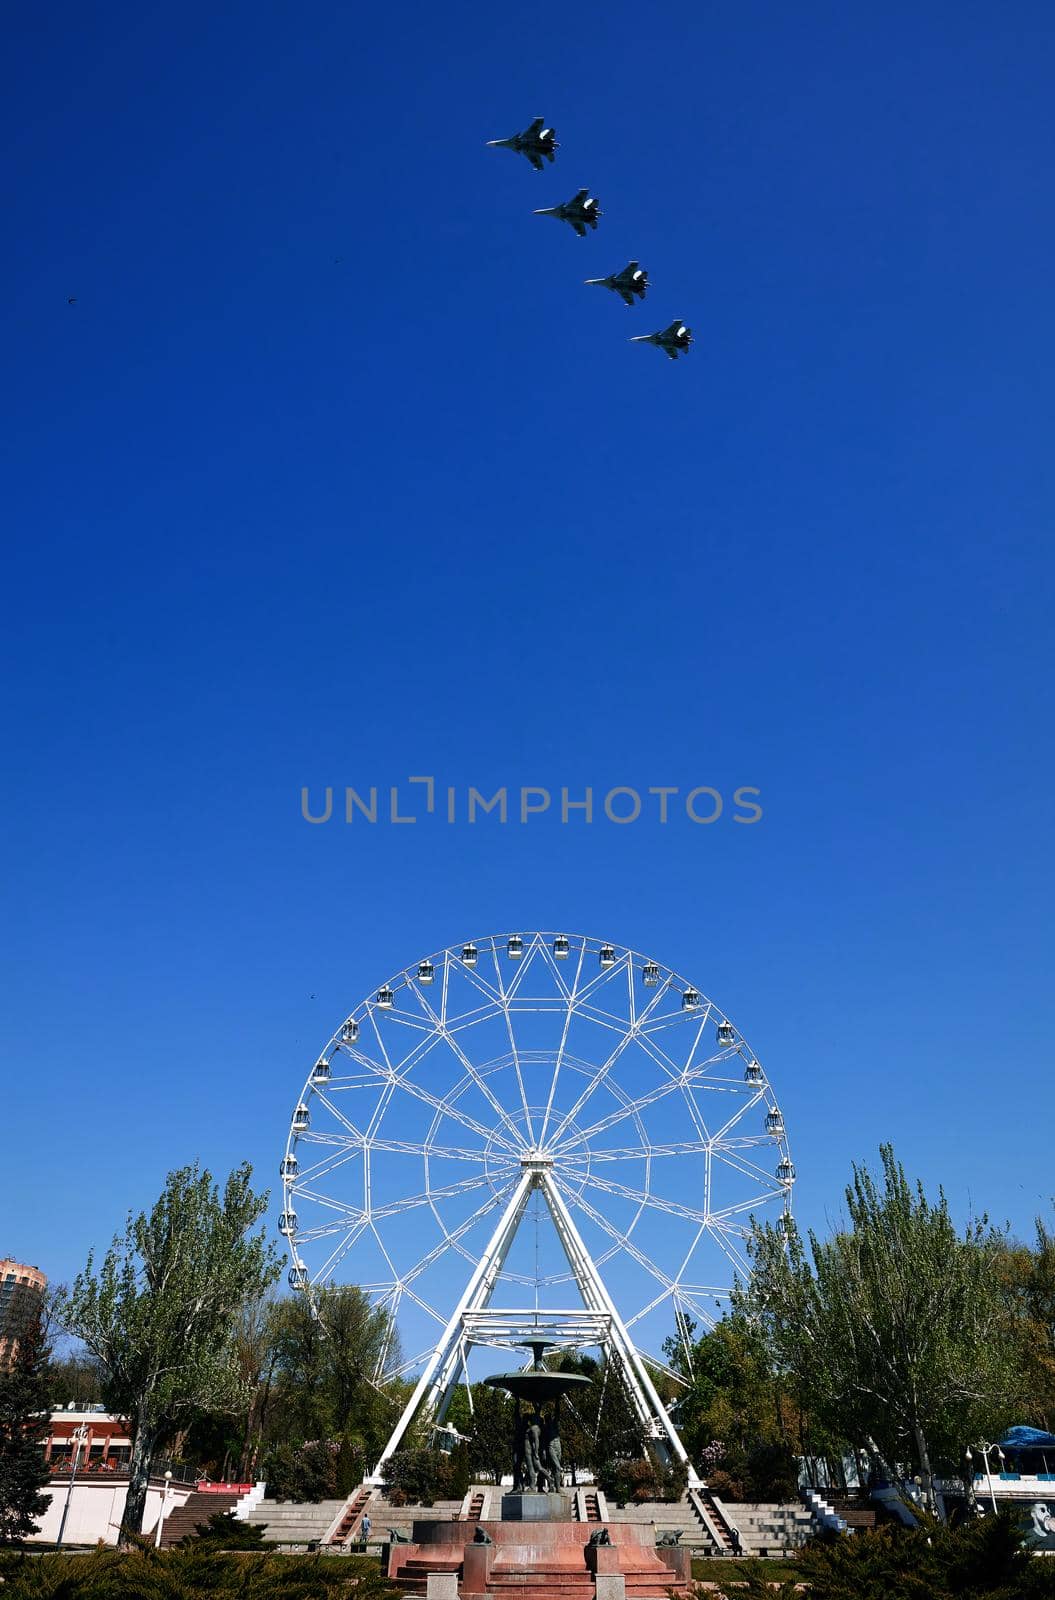 Rehearsal of the air parade in honor of the 75th anniversary of the end of World war II. Flying aircraft on the background of the Ferris wheel on theater square. 30.04.2020, Rostov-on-Don, Russia. by EvgeniyQW